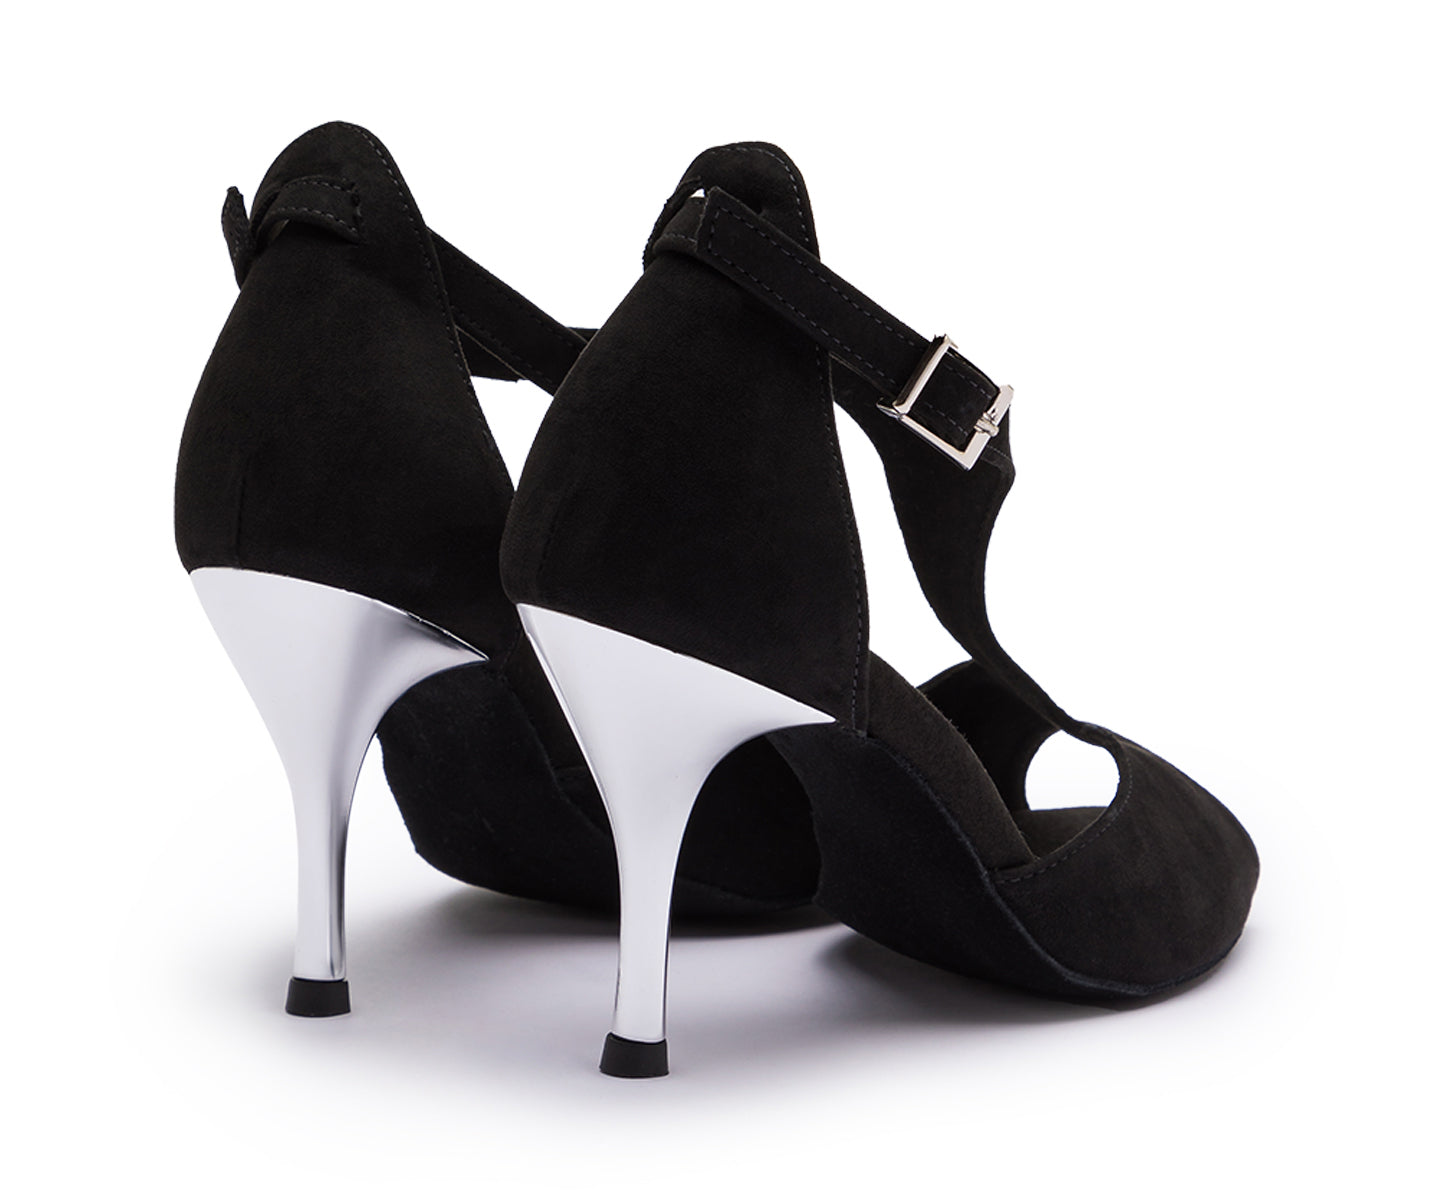 DQ1001 dance shoes in black with suede sole